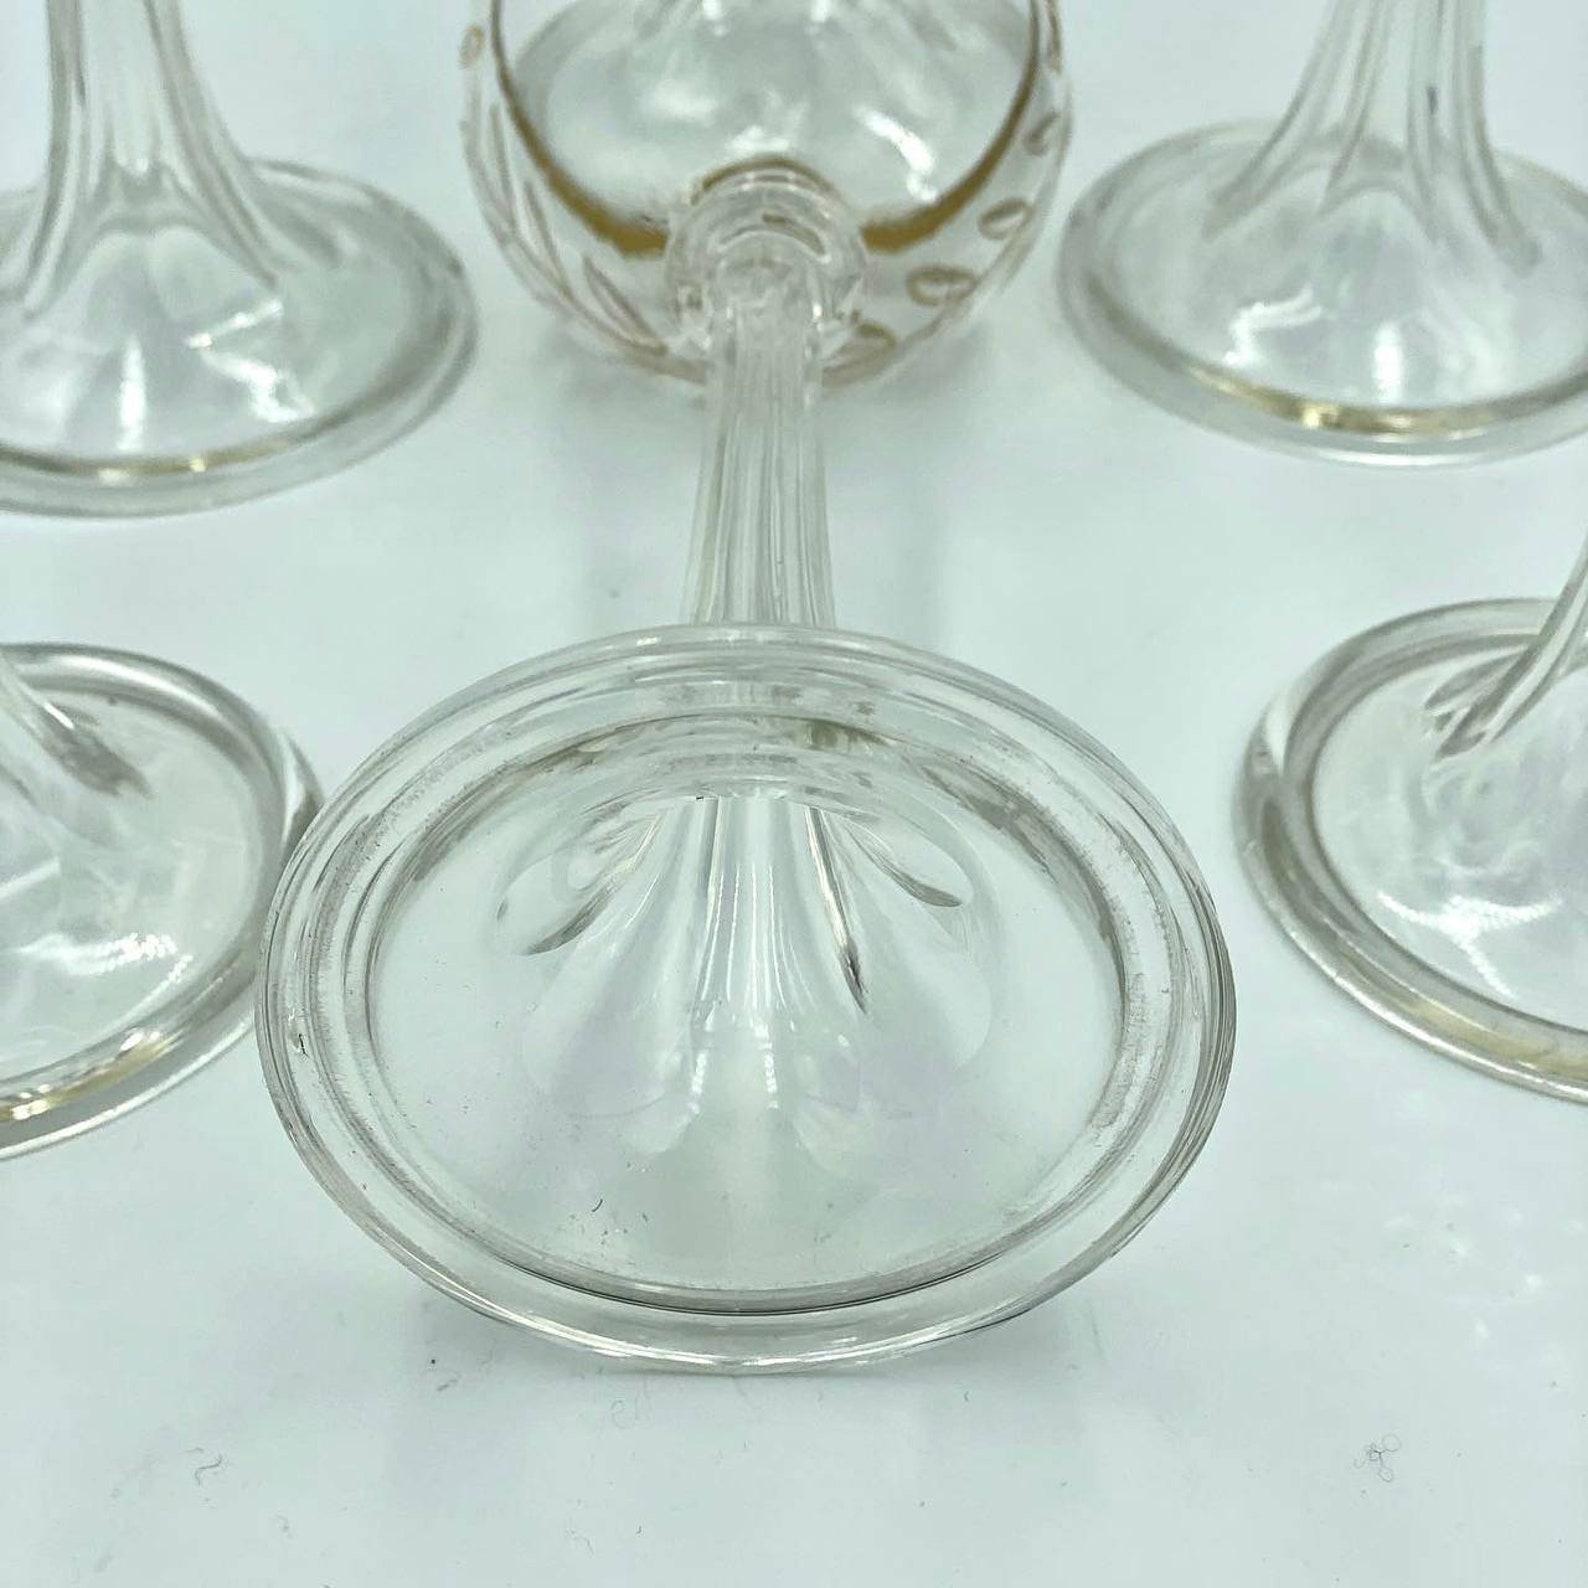 is there a market for old crystal glassware